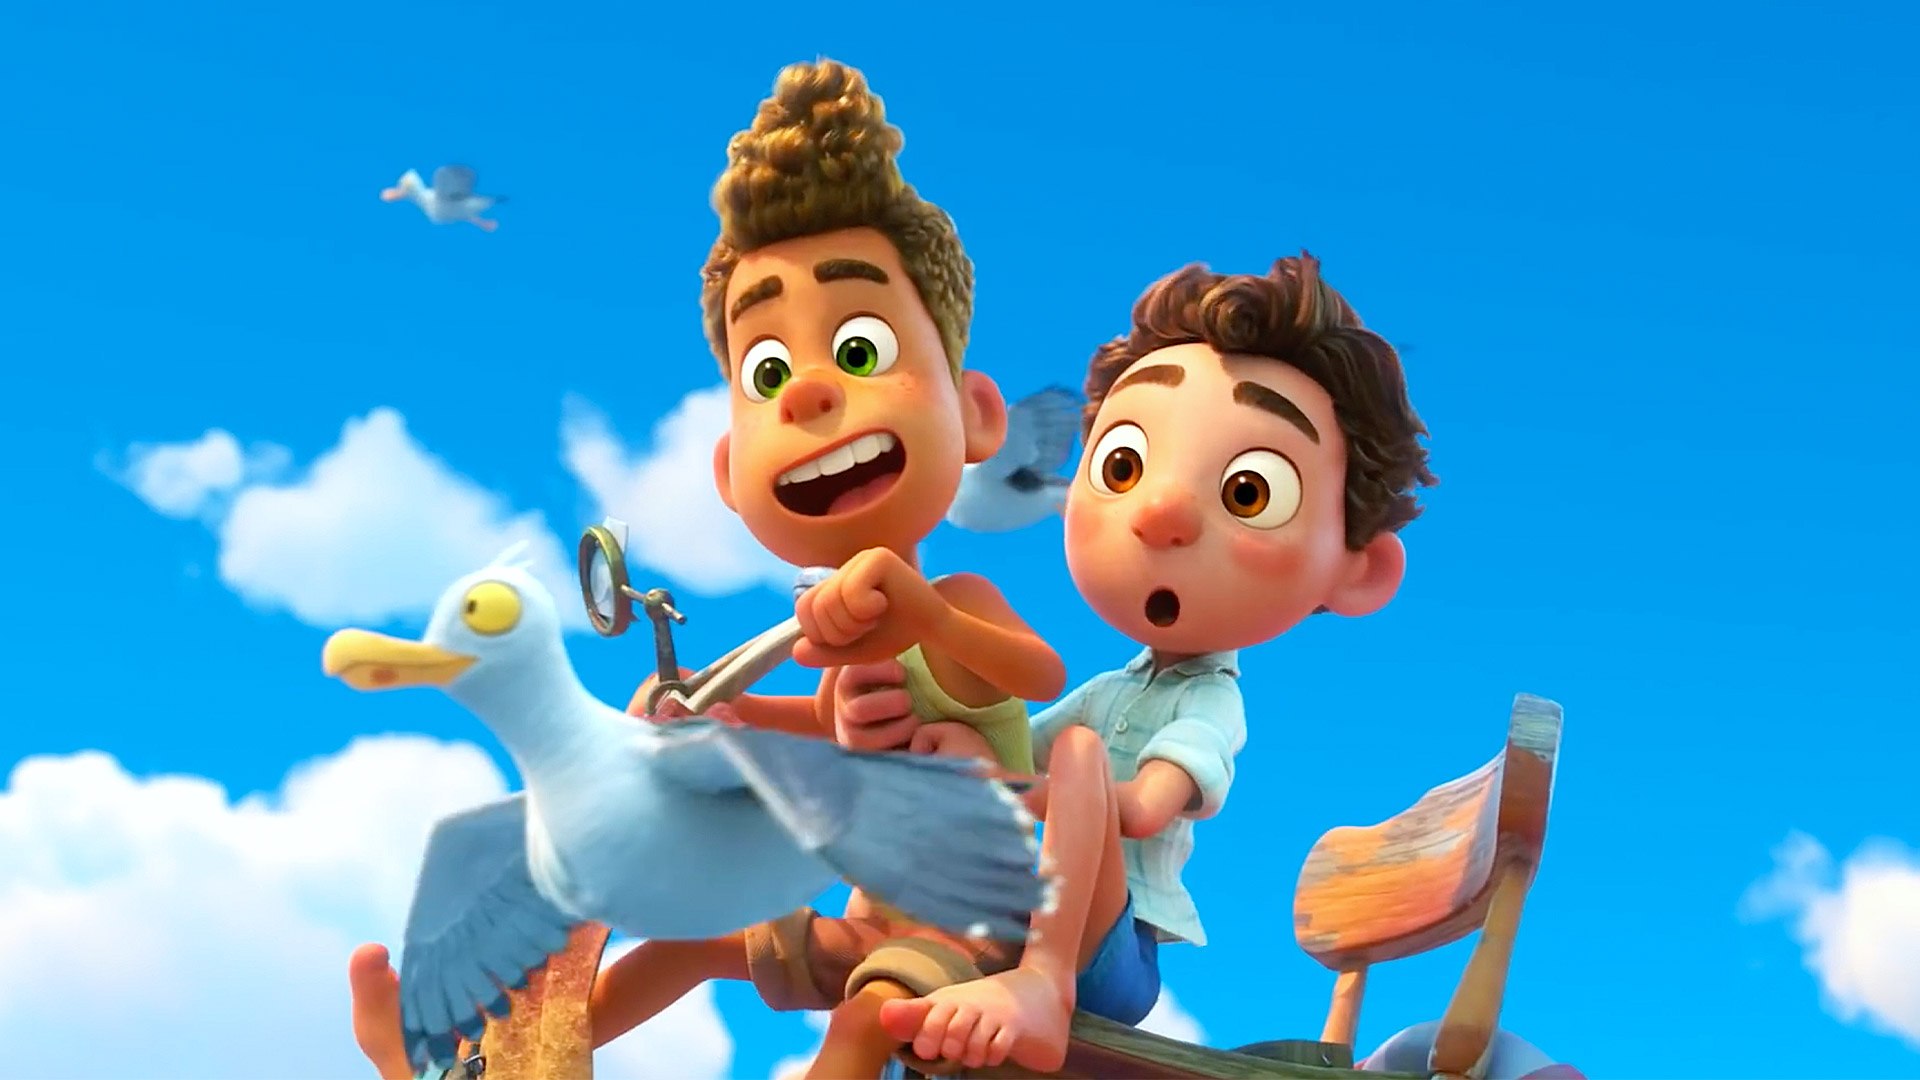 Pixar Says Luca Isn't Gay, but the Movie Speaks for Itself